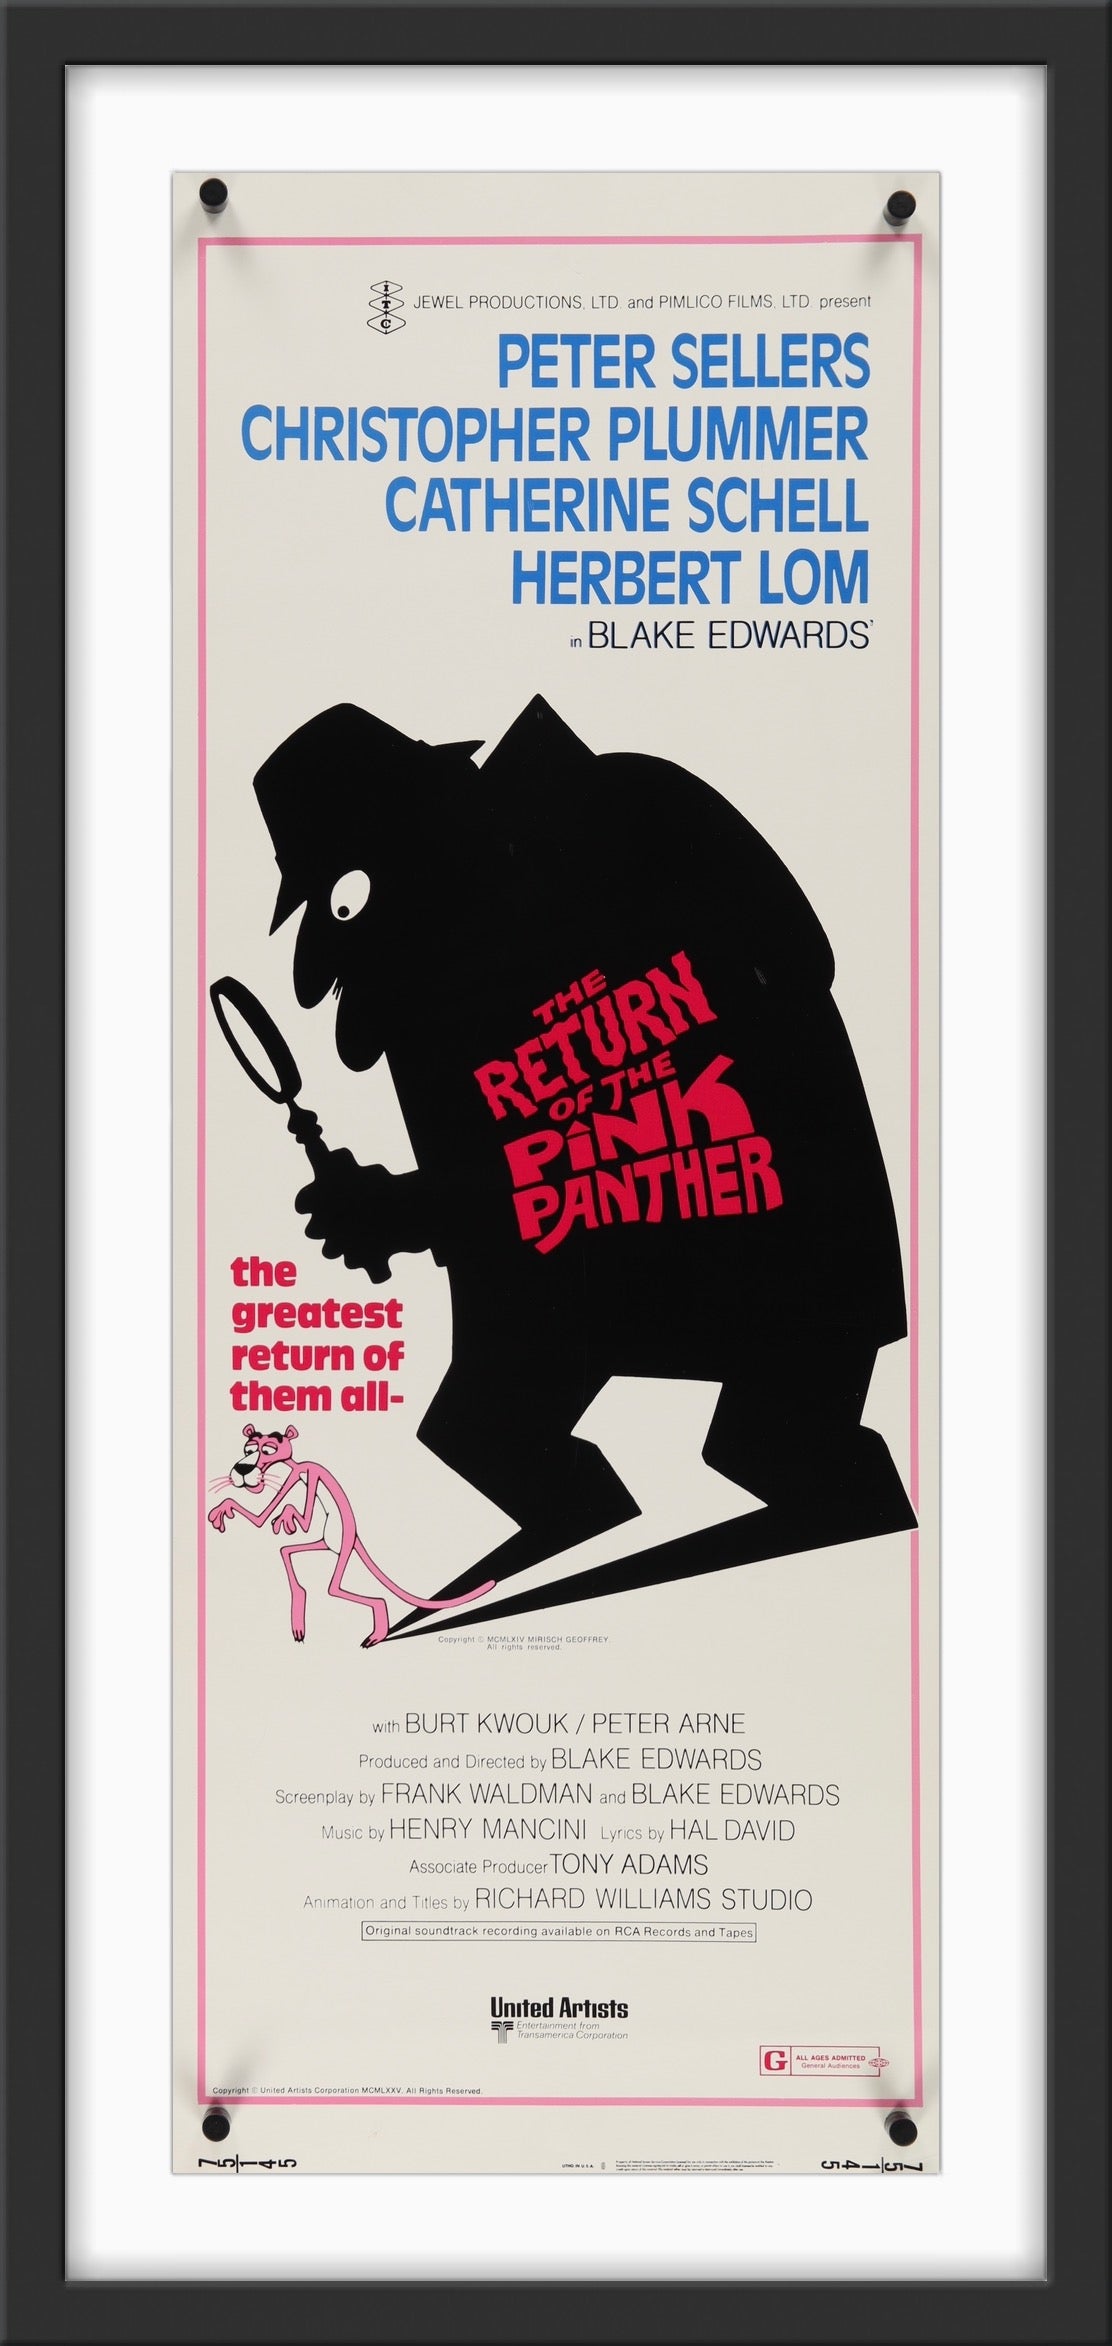 An original movie poster for the Peter Seller's film The Return of the Pink Panther